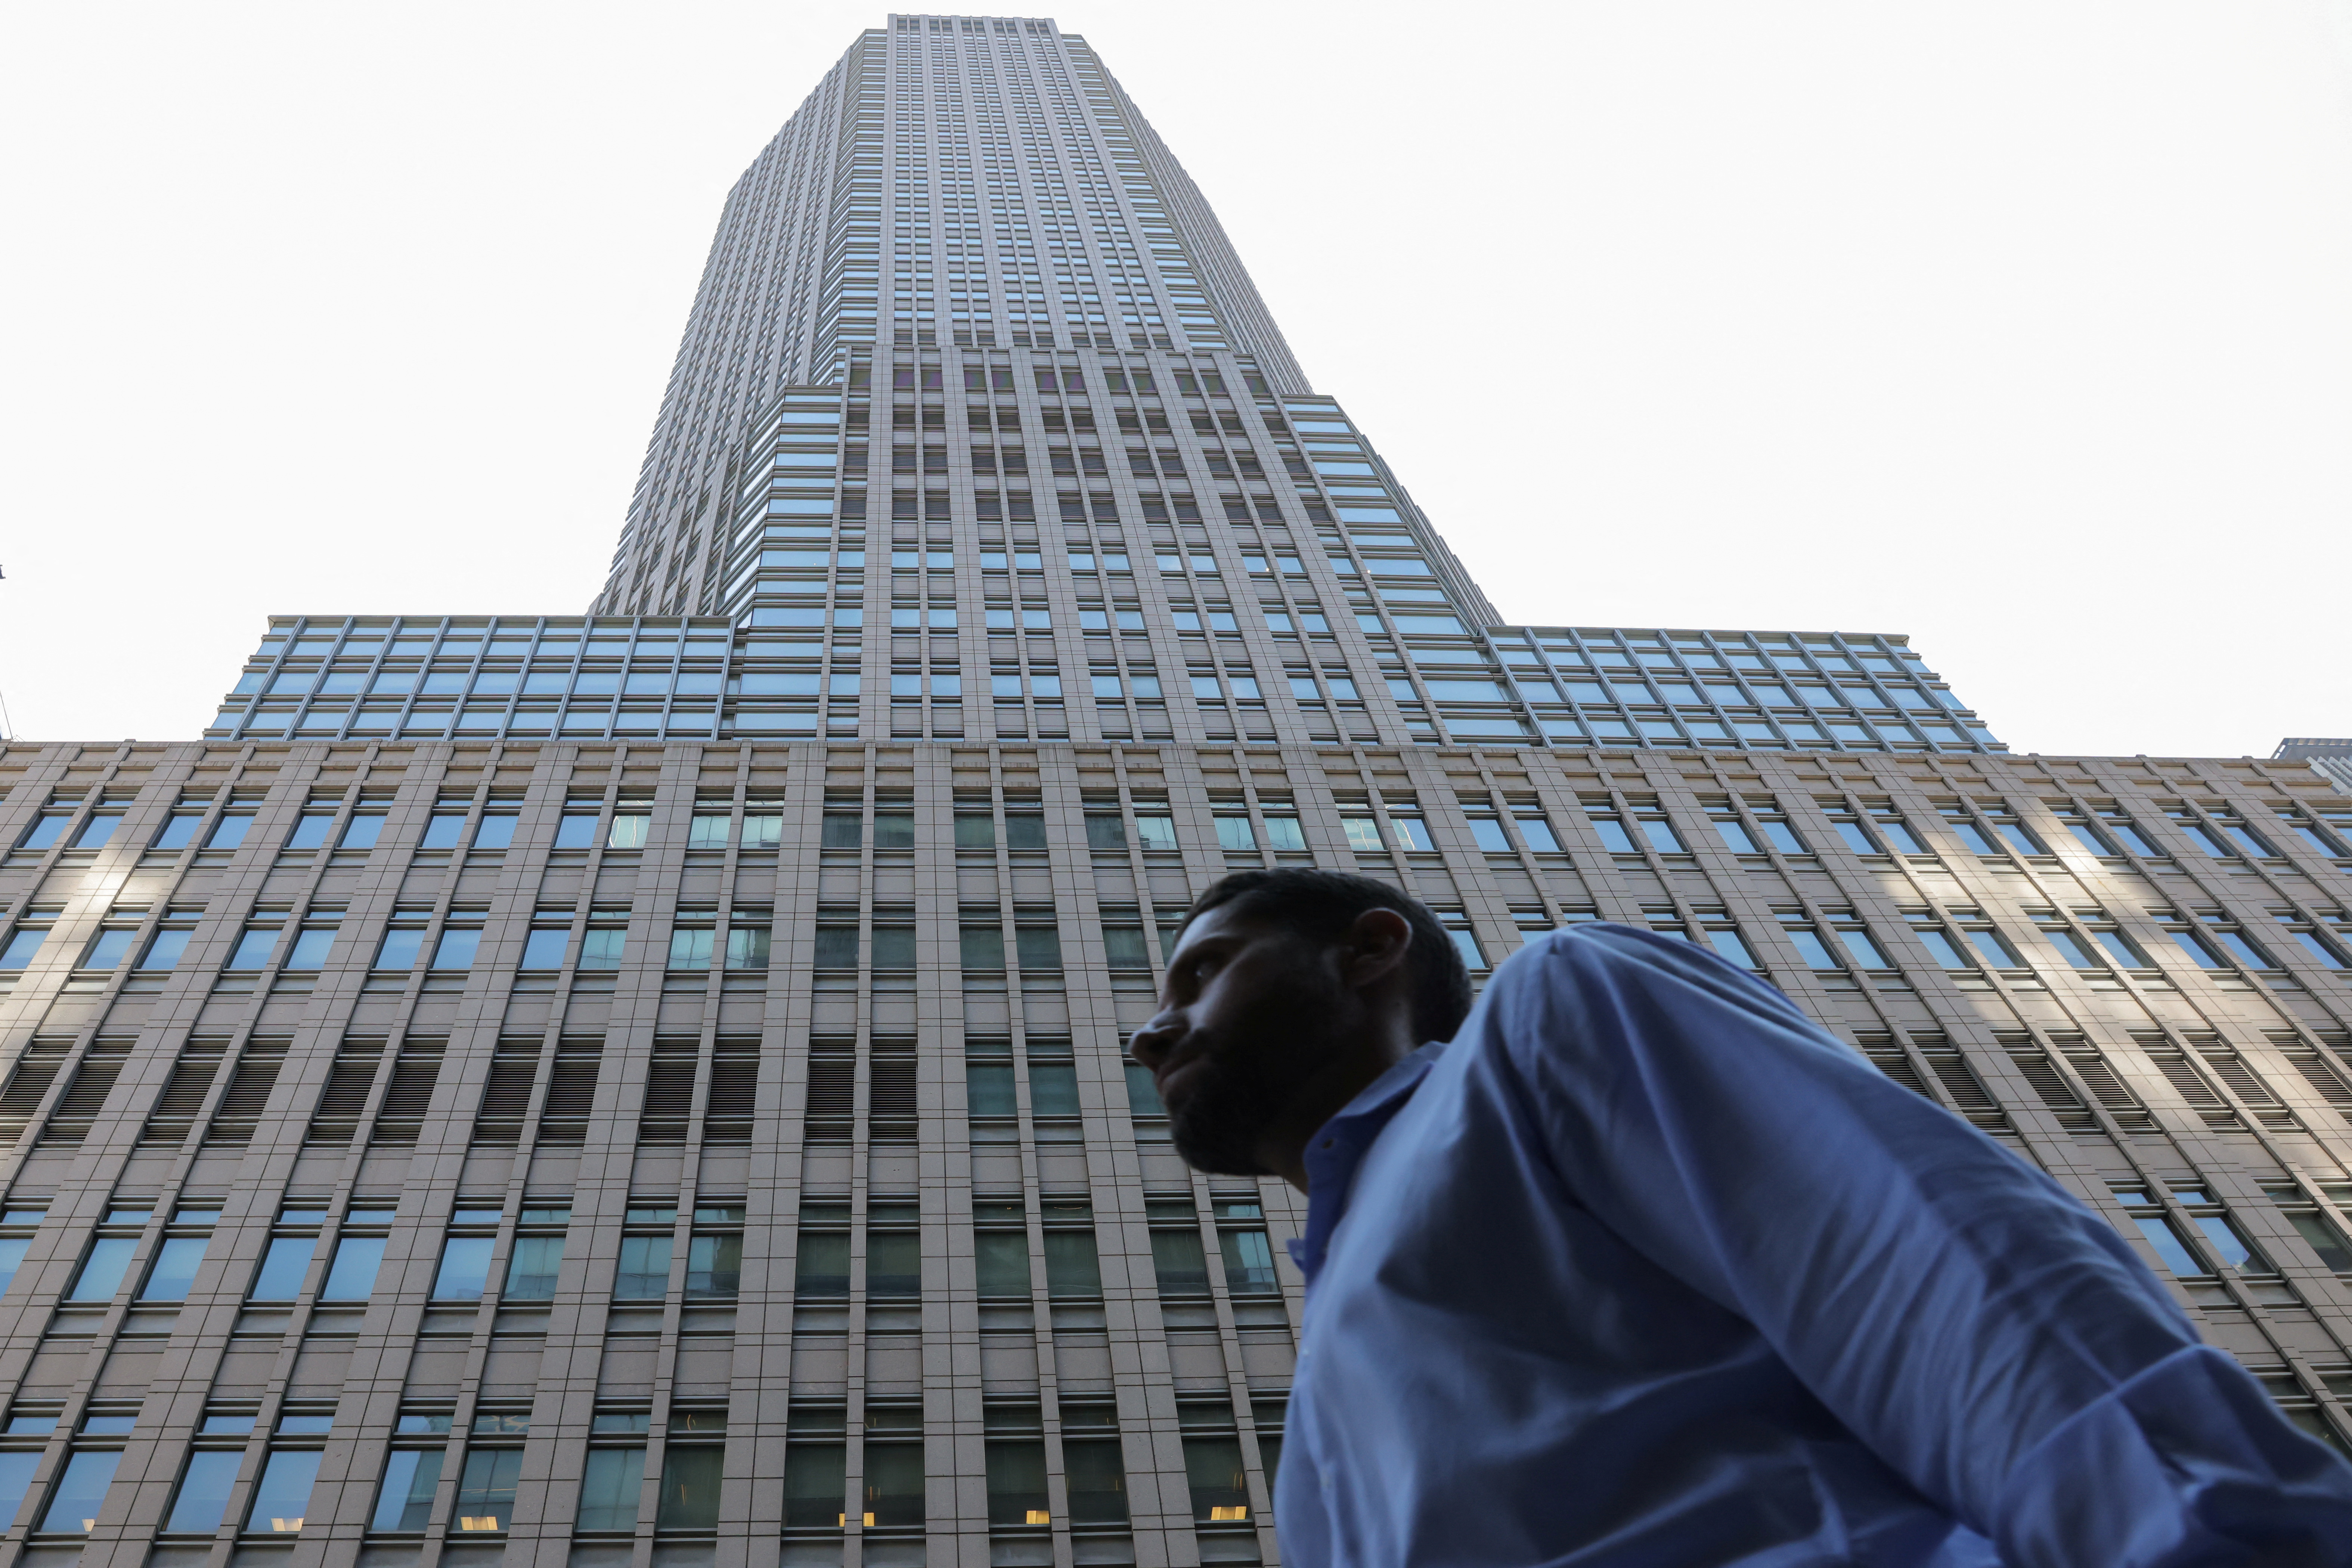 A person walks by the JPMorgan Chase & Co. New York Head Quarters in Manhattan, New York City